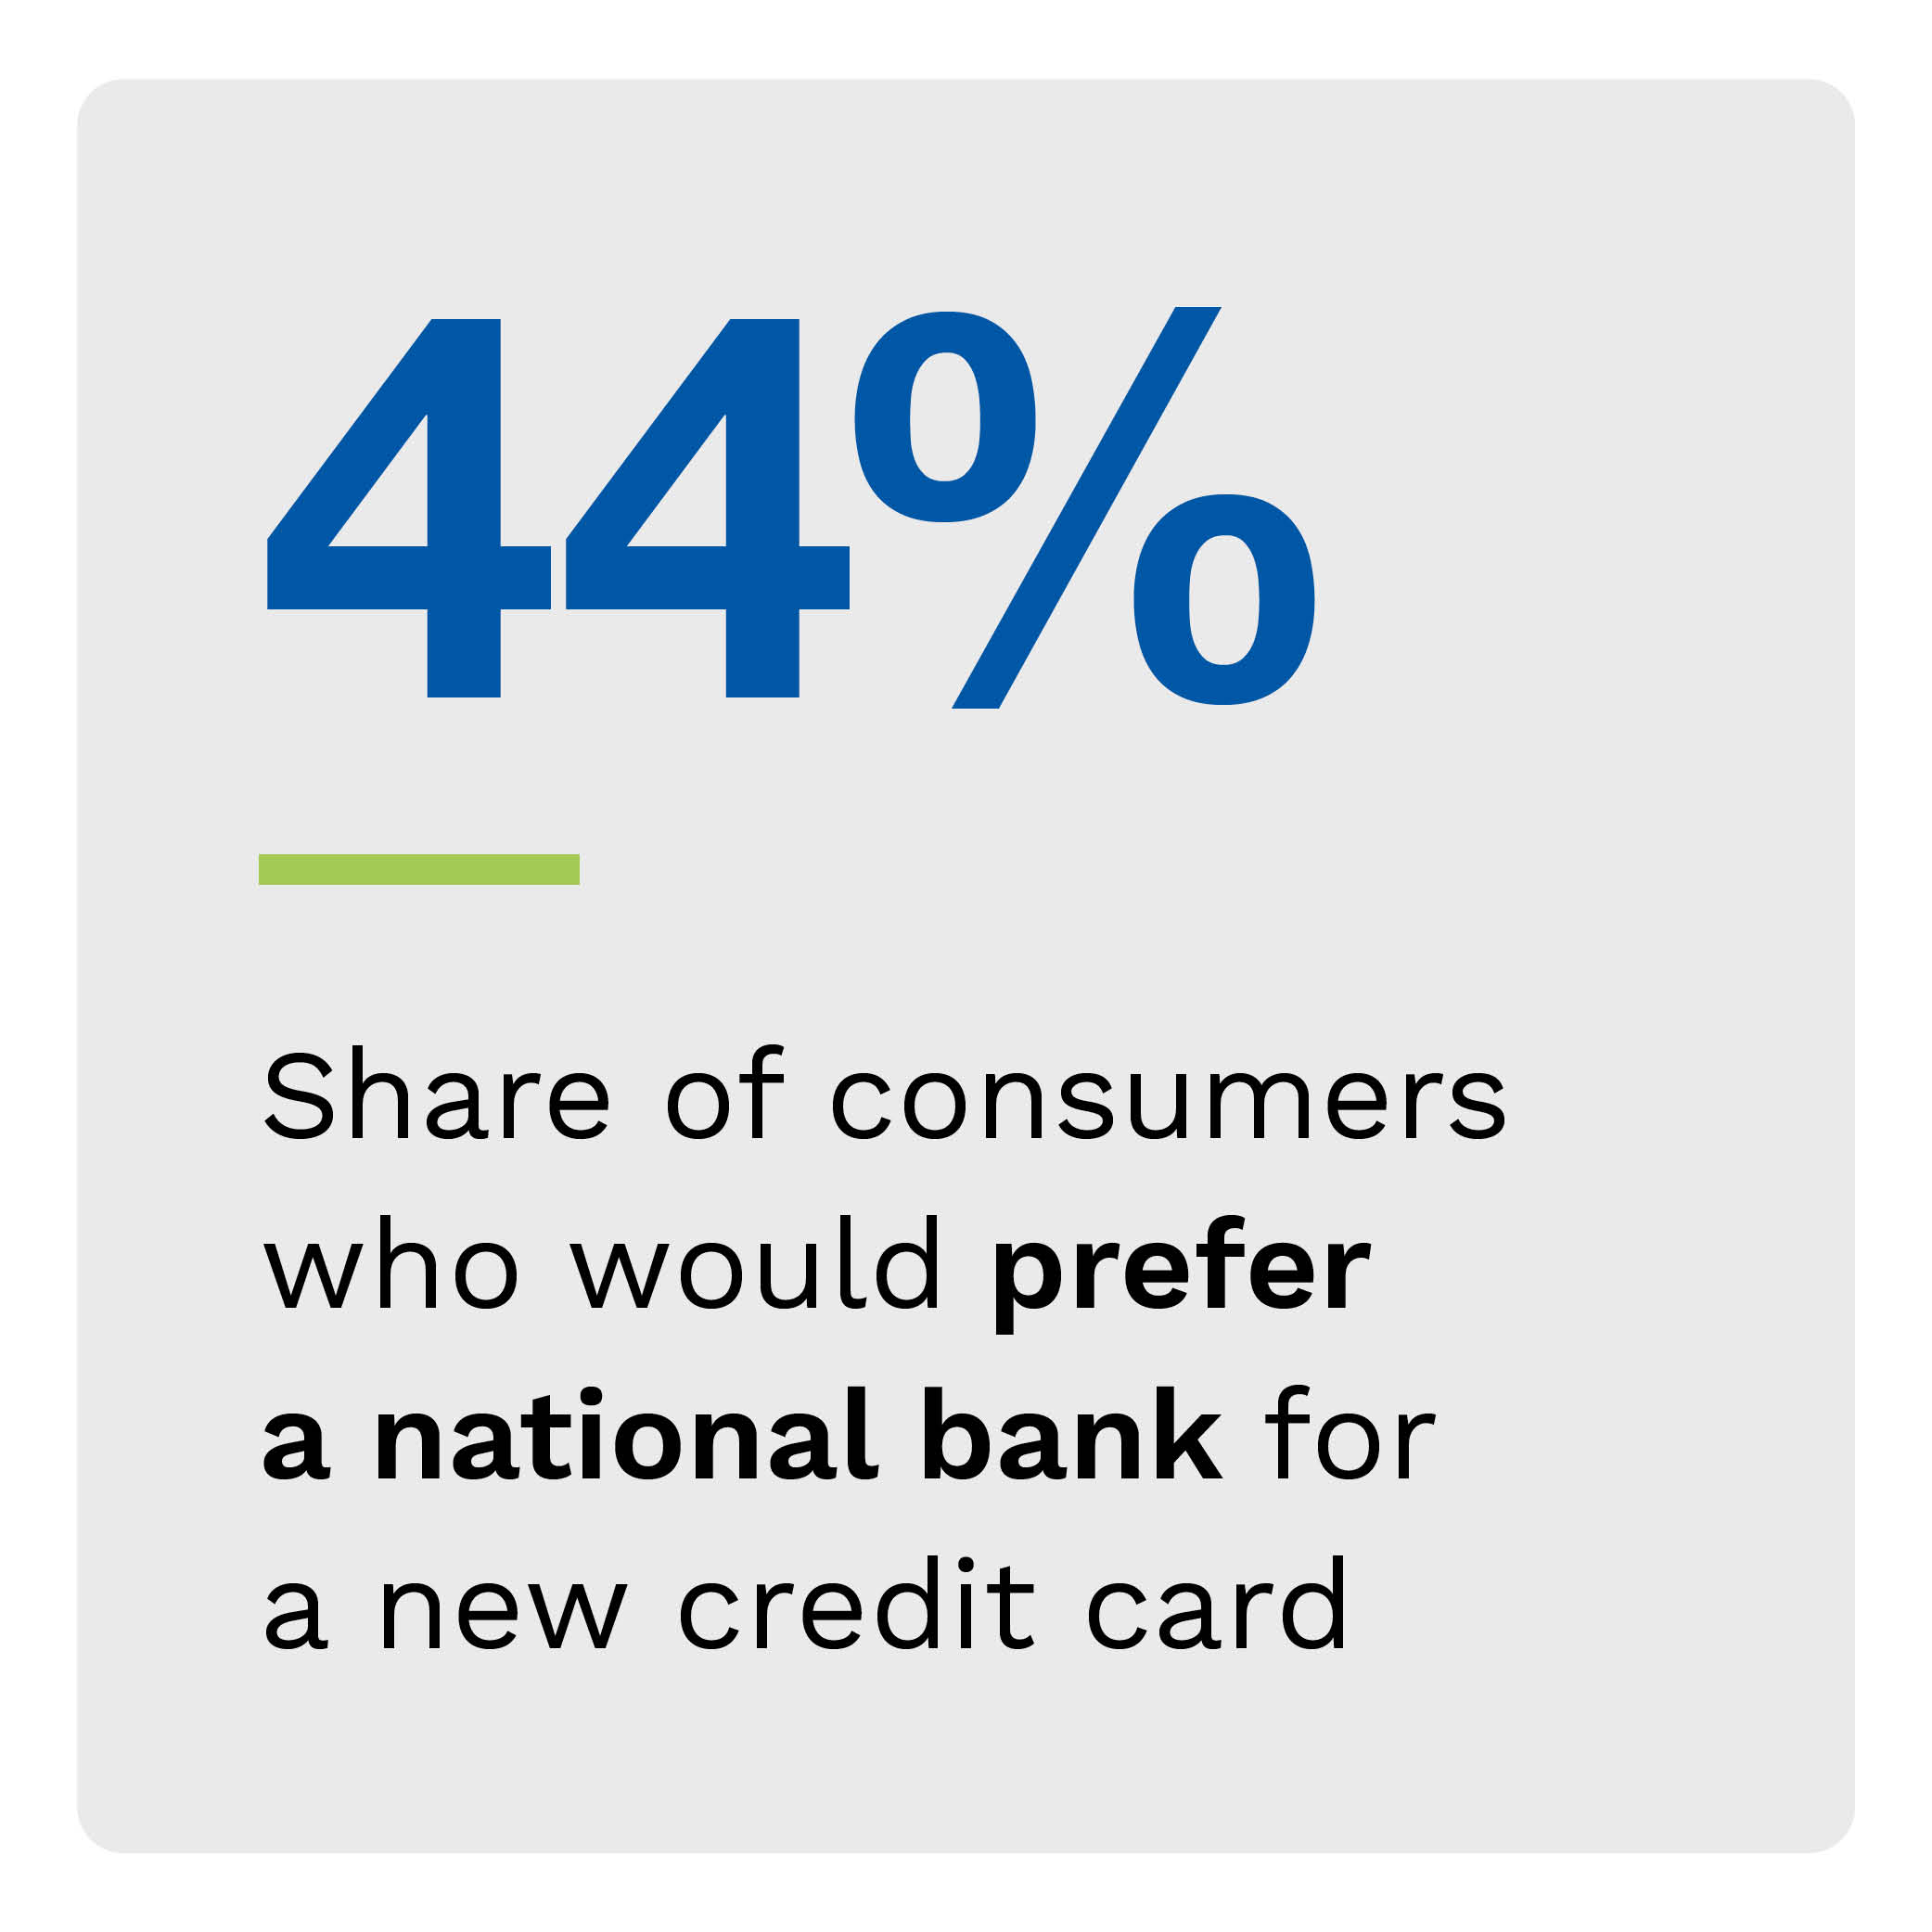 44%: Share of consumers who would prefer a national bank for a new credit card